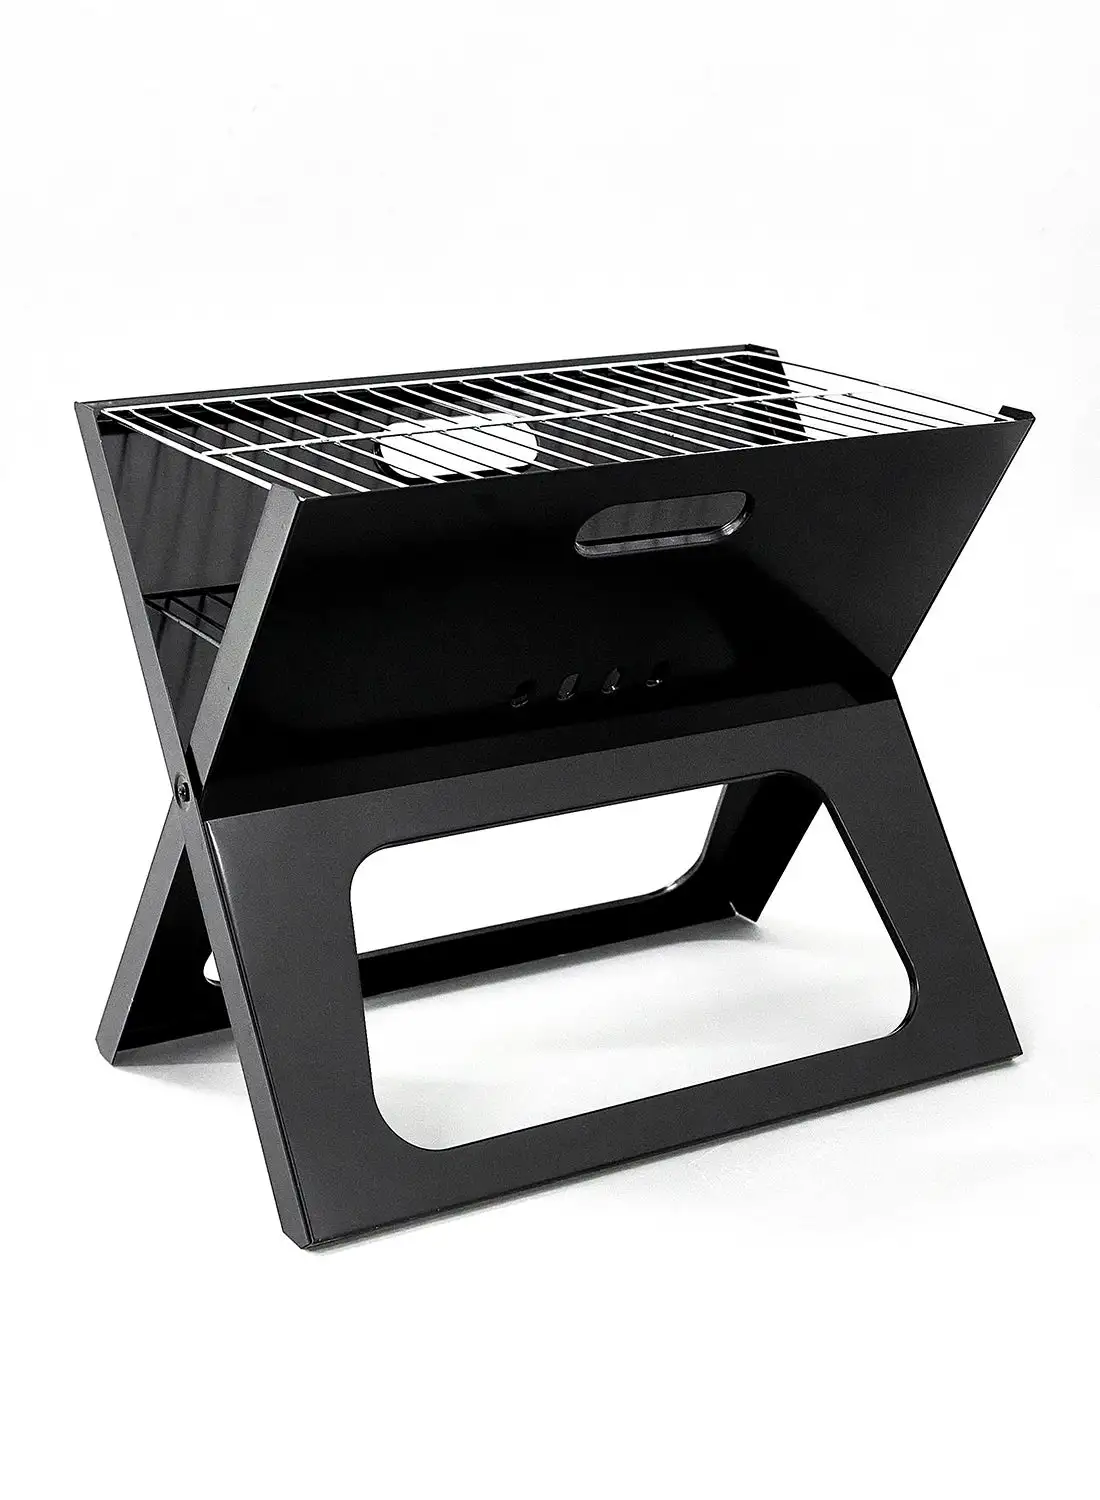 Noon East Foldable Charcoal BBQ Grill Black/Criss-Cross